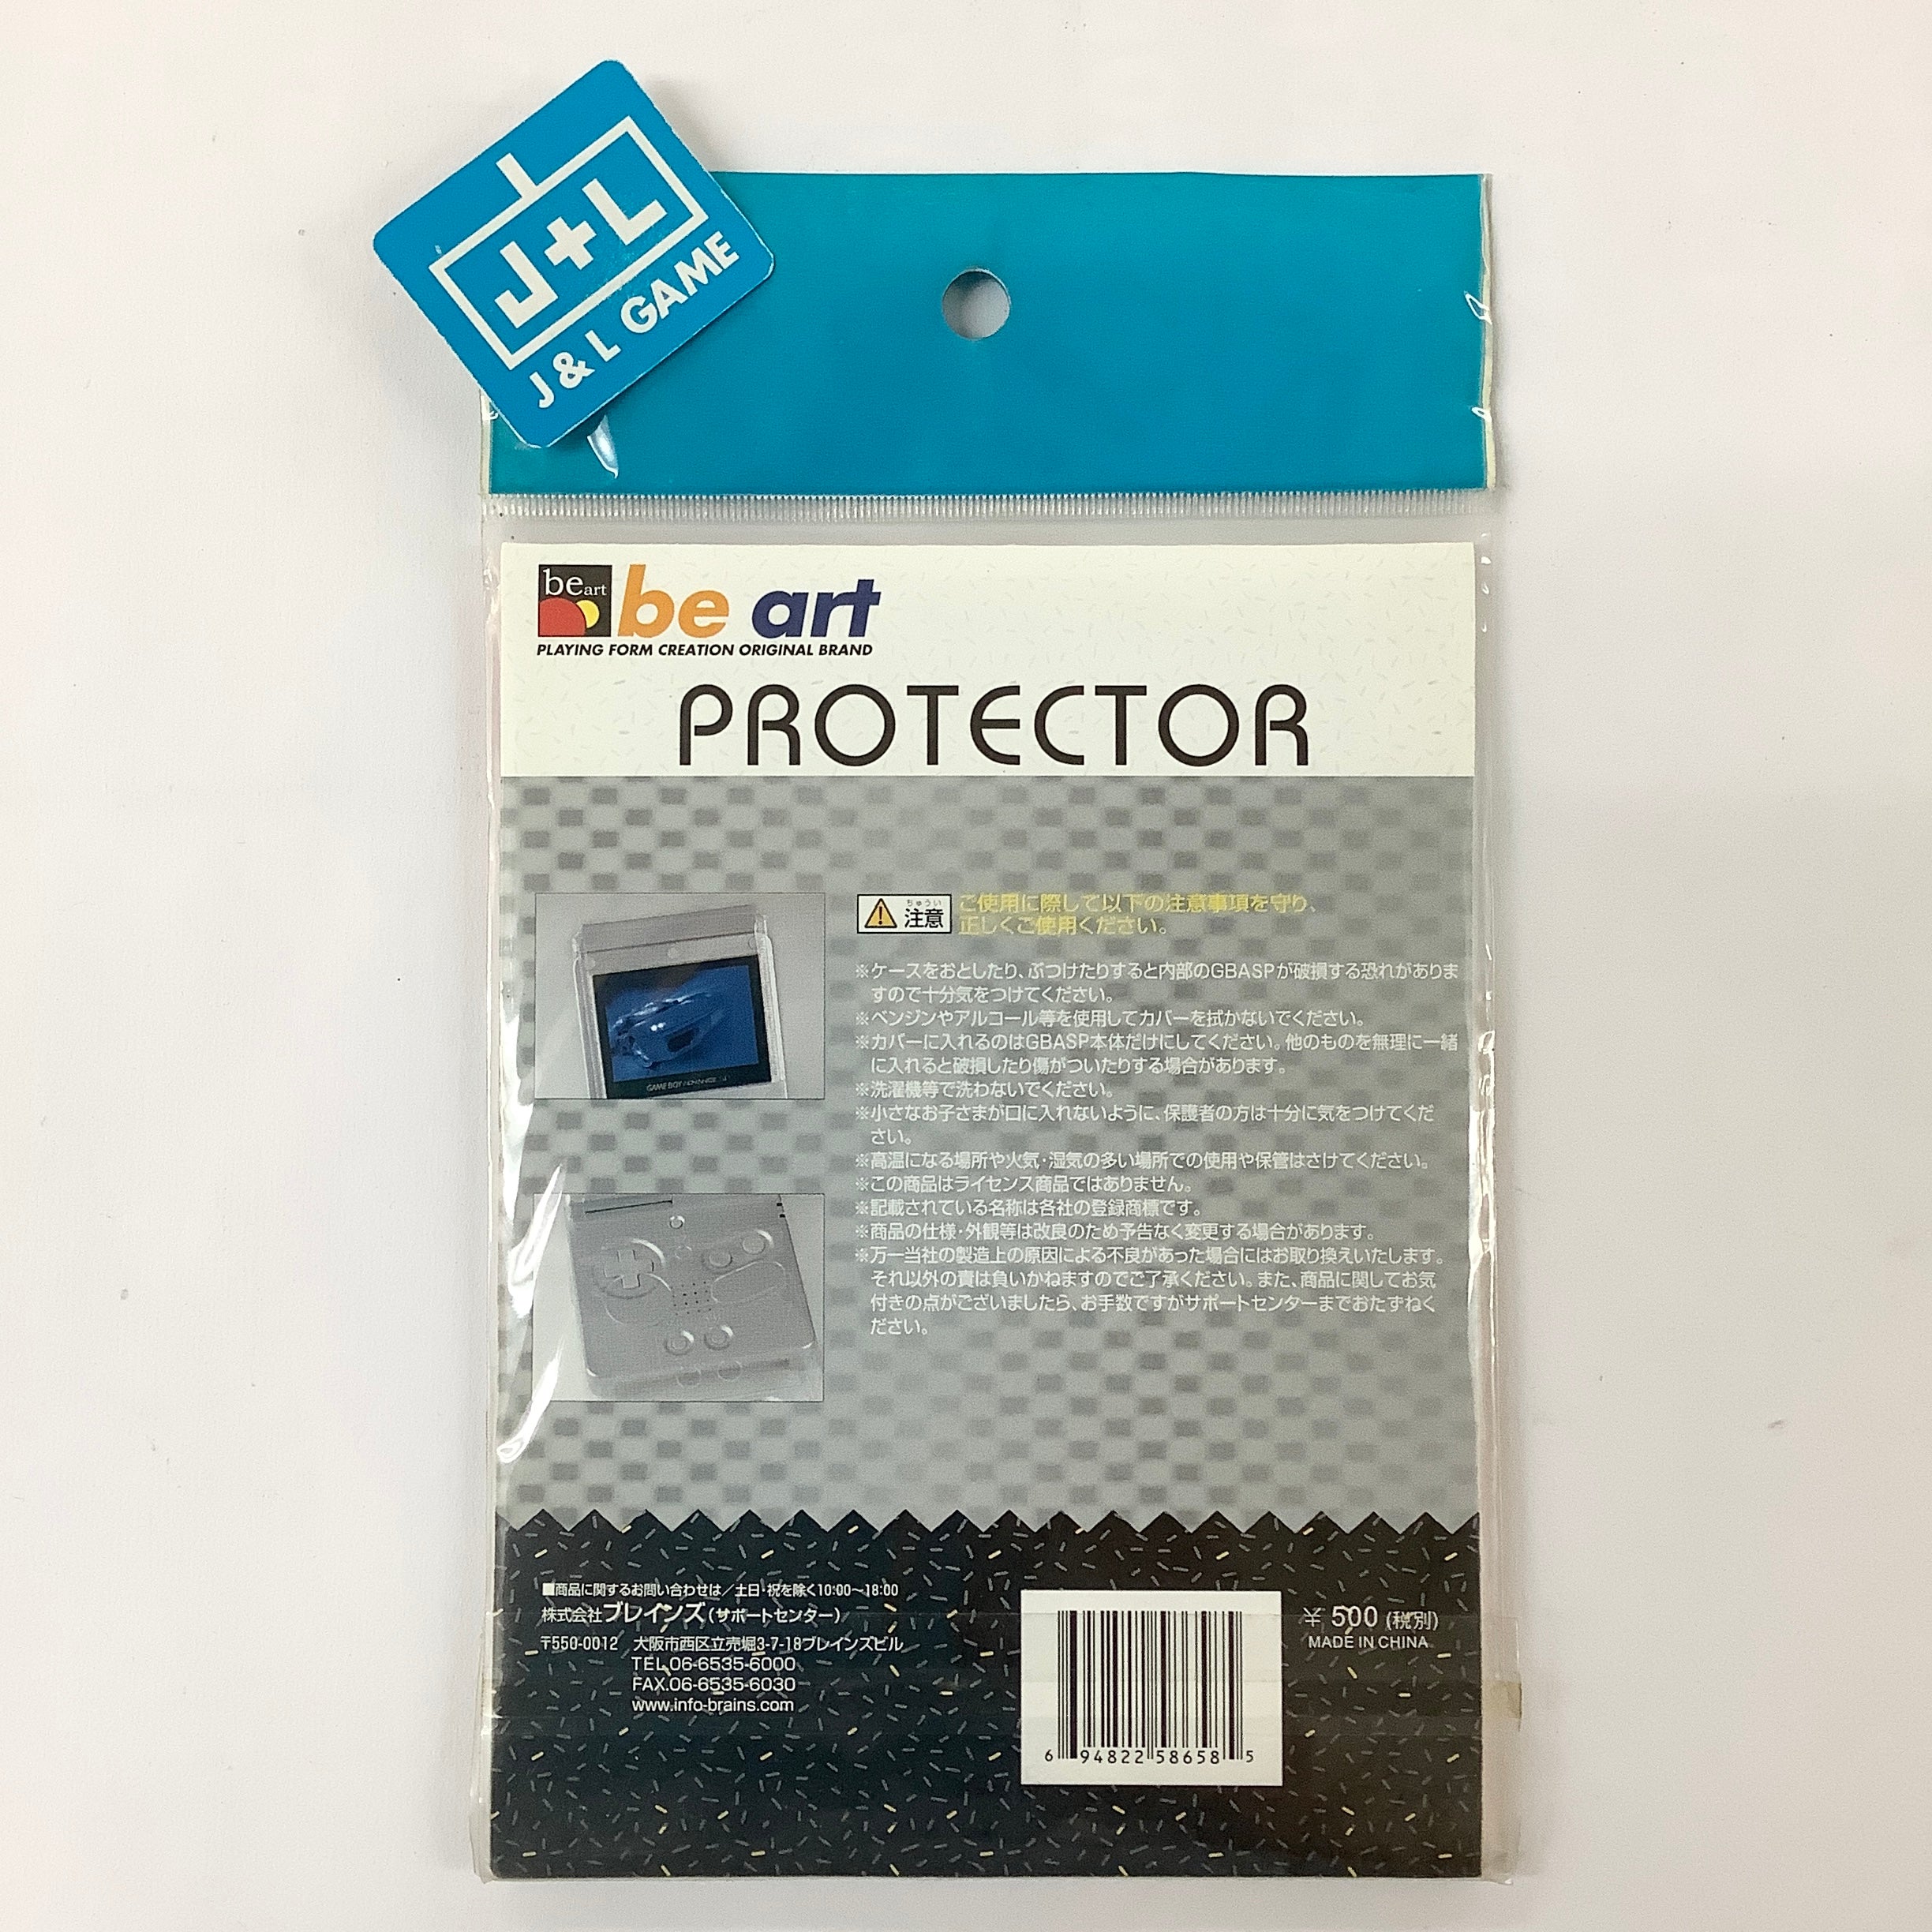 BeArt Gameboy Advance SP Protector - (GBA) Game Boy Advance Accessories BeArt   